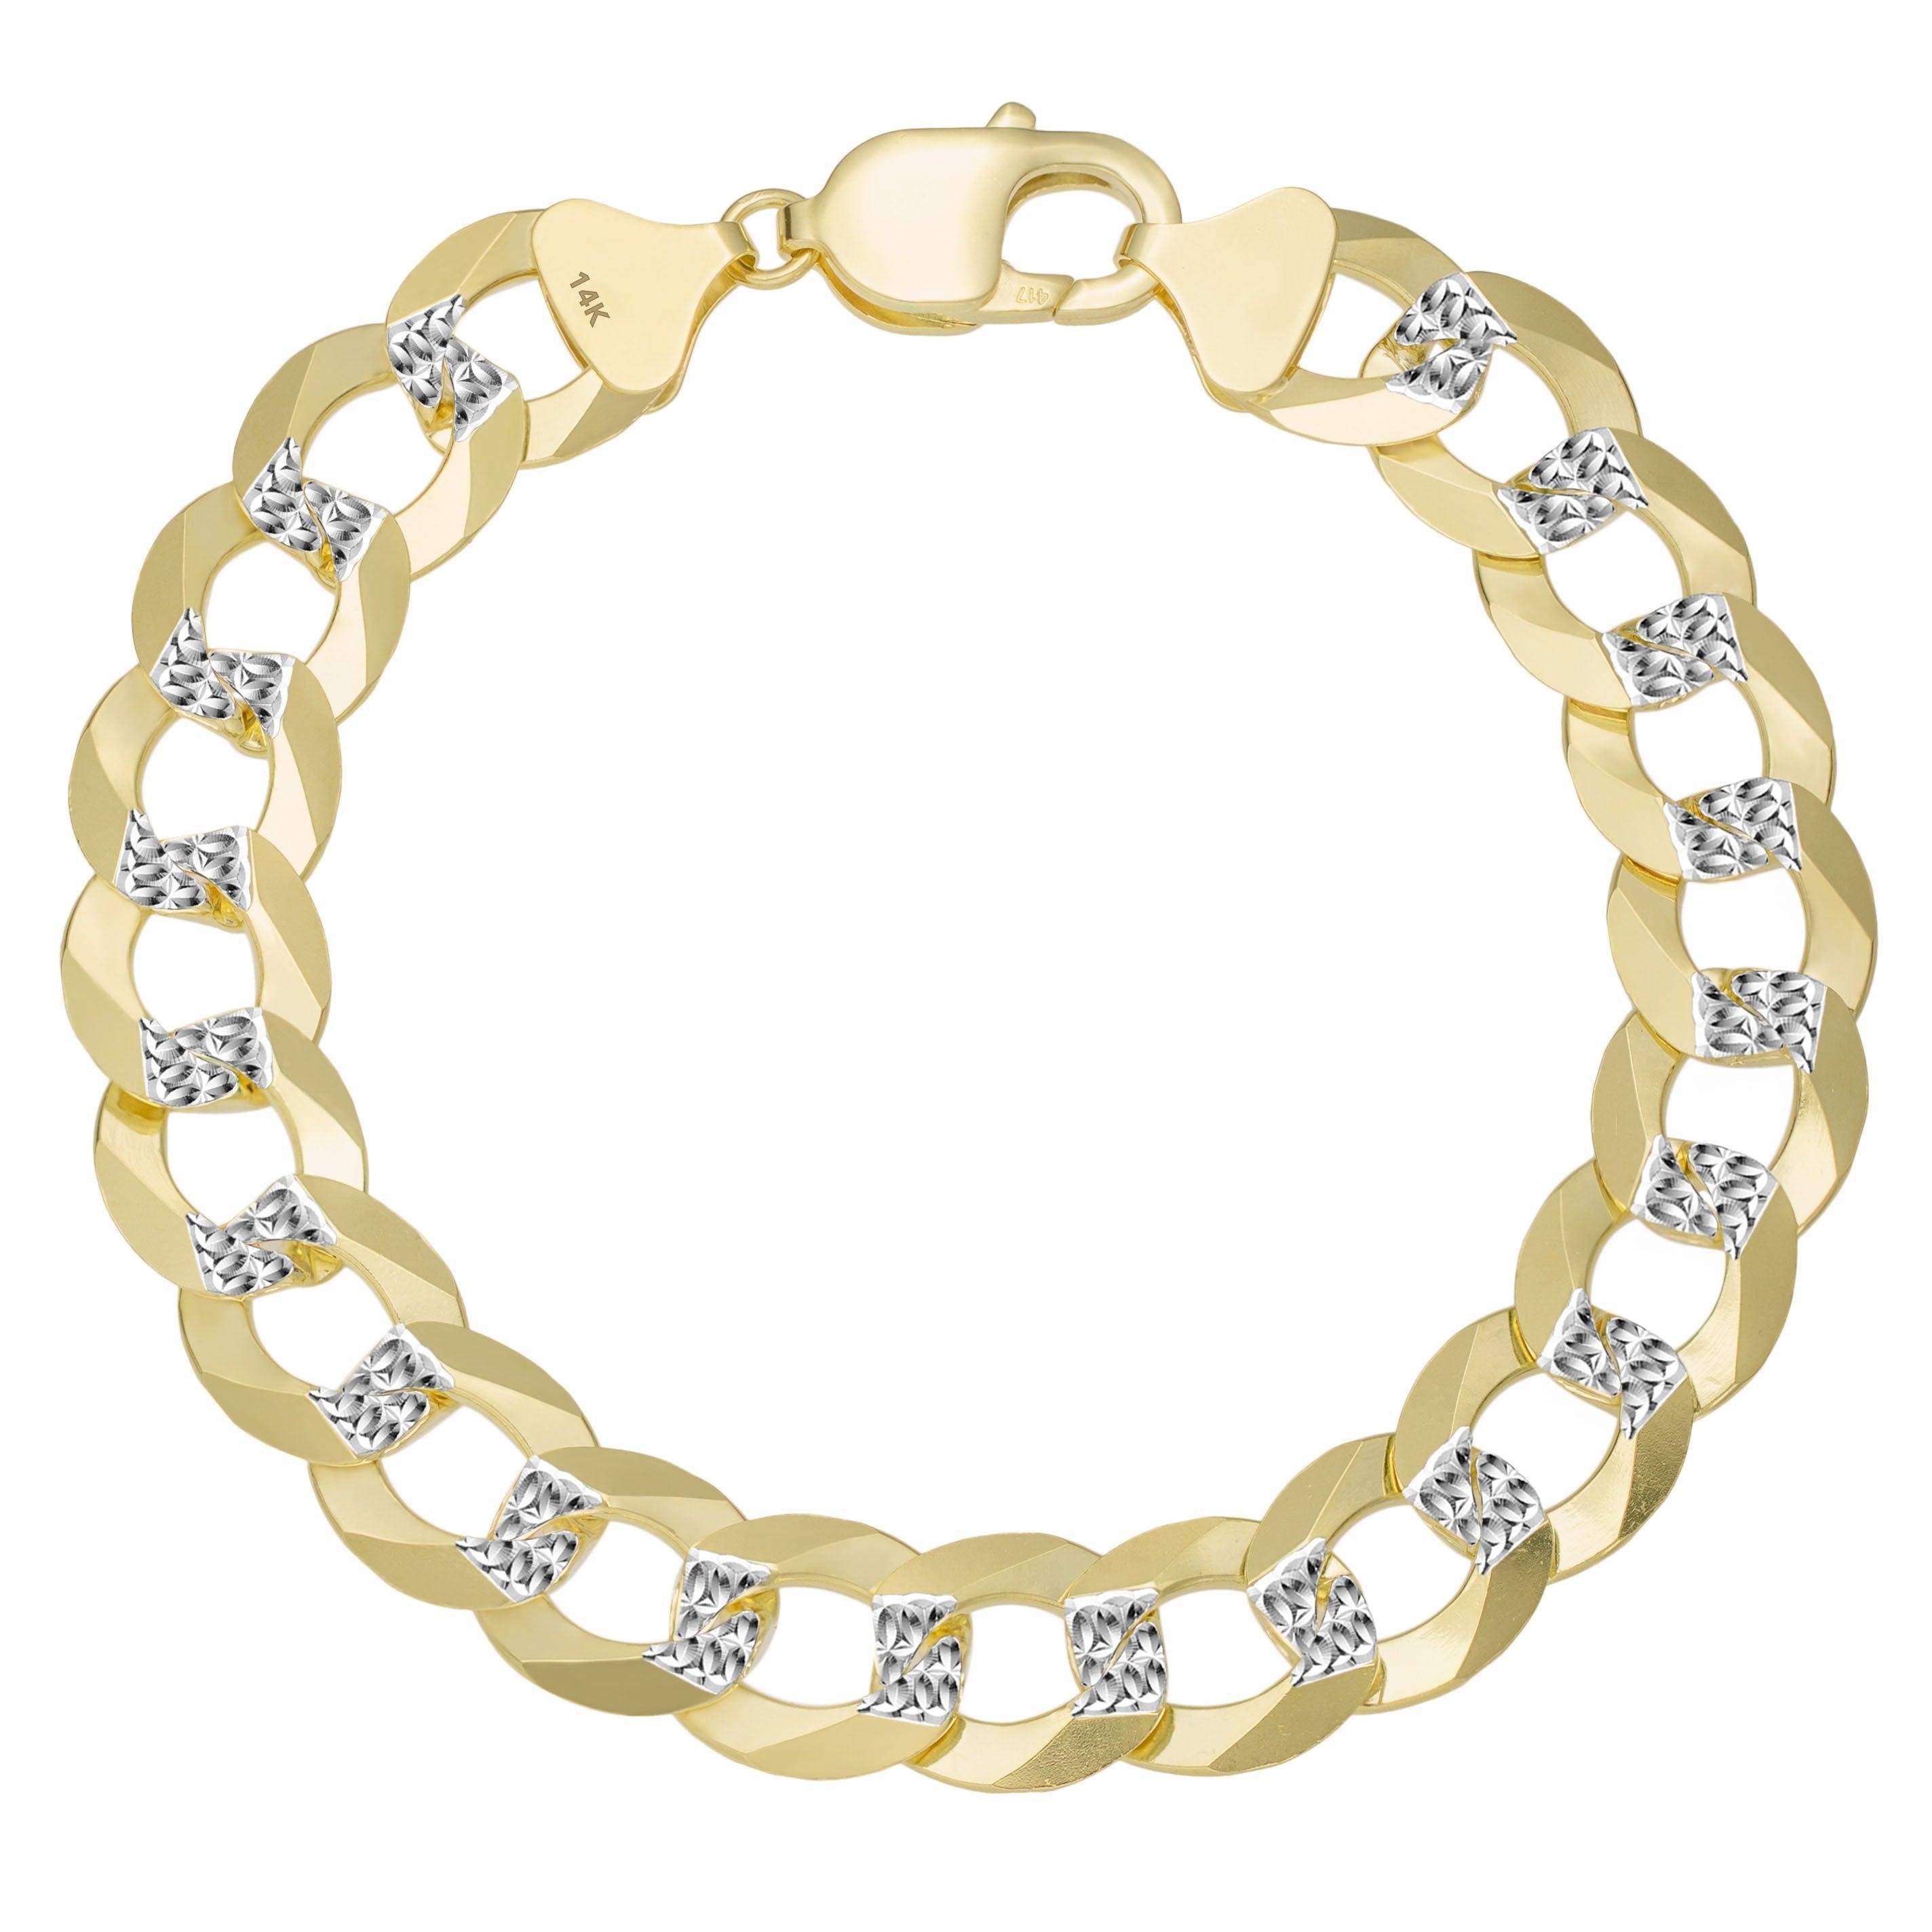 Solid Curb Link Bracelet 14K Yellow Gold 8.75